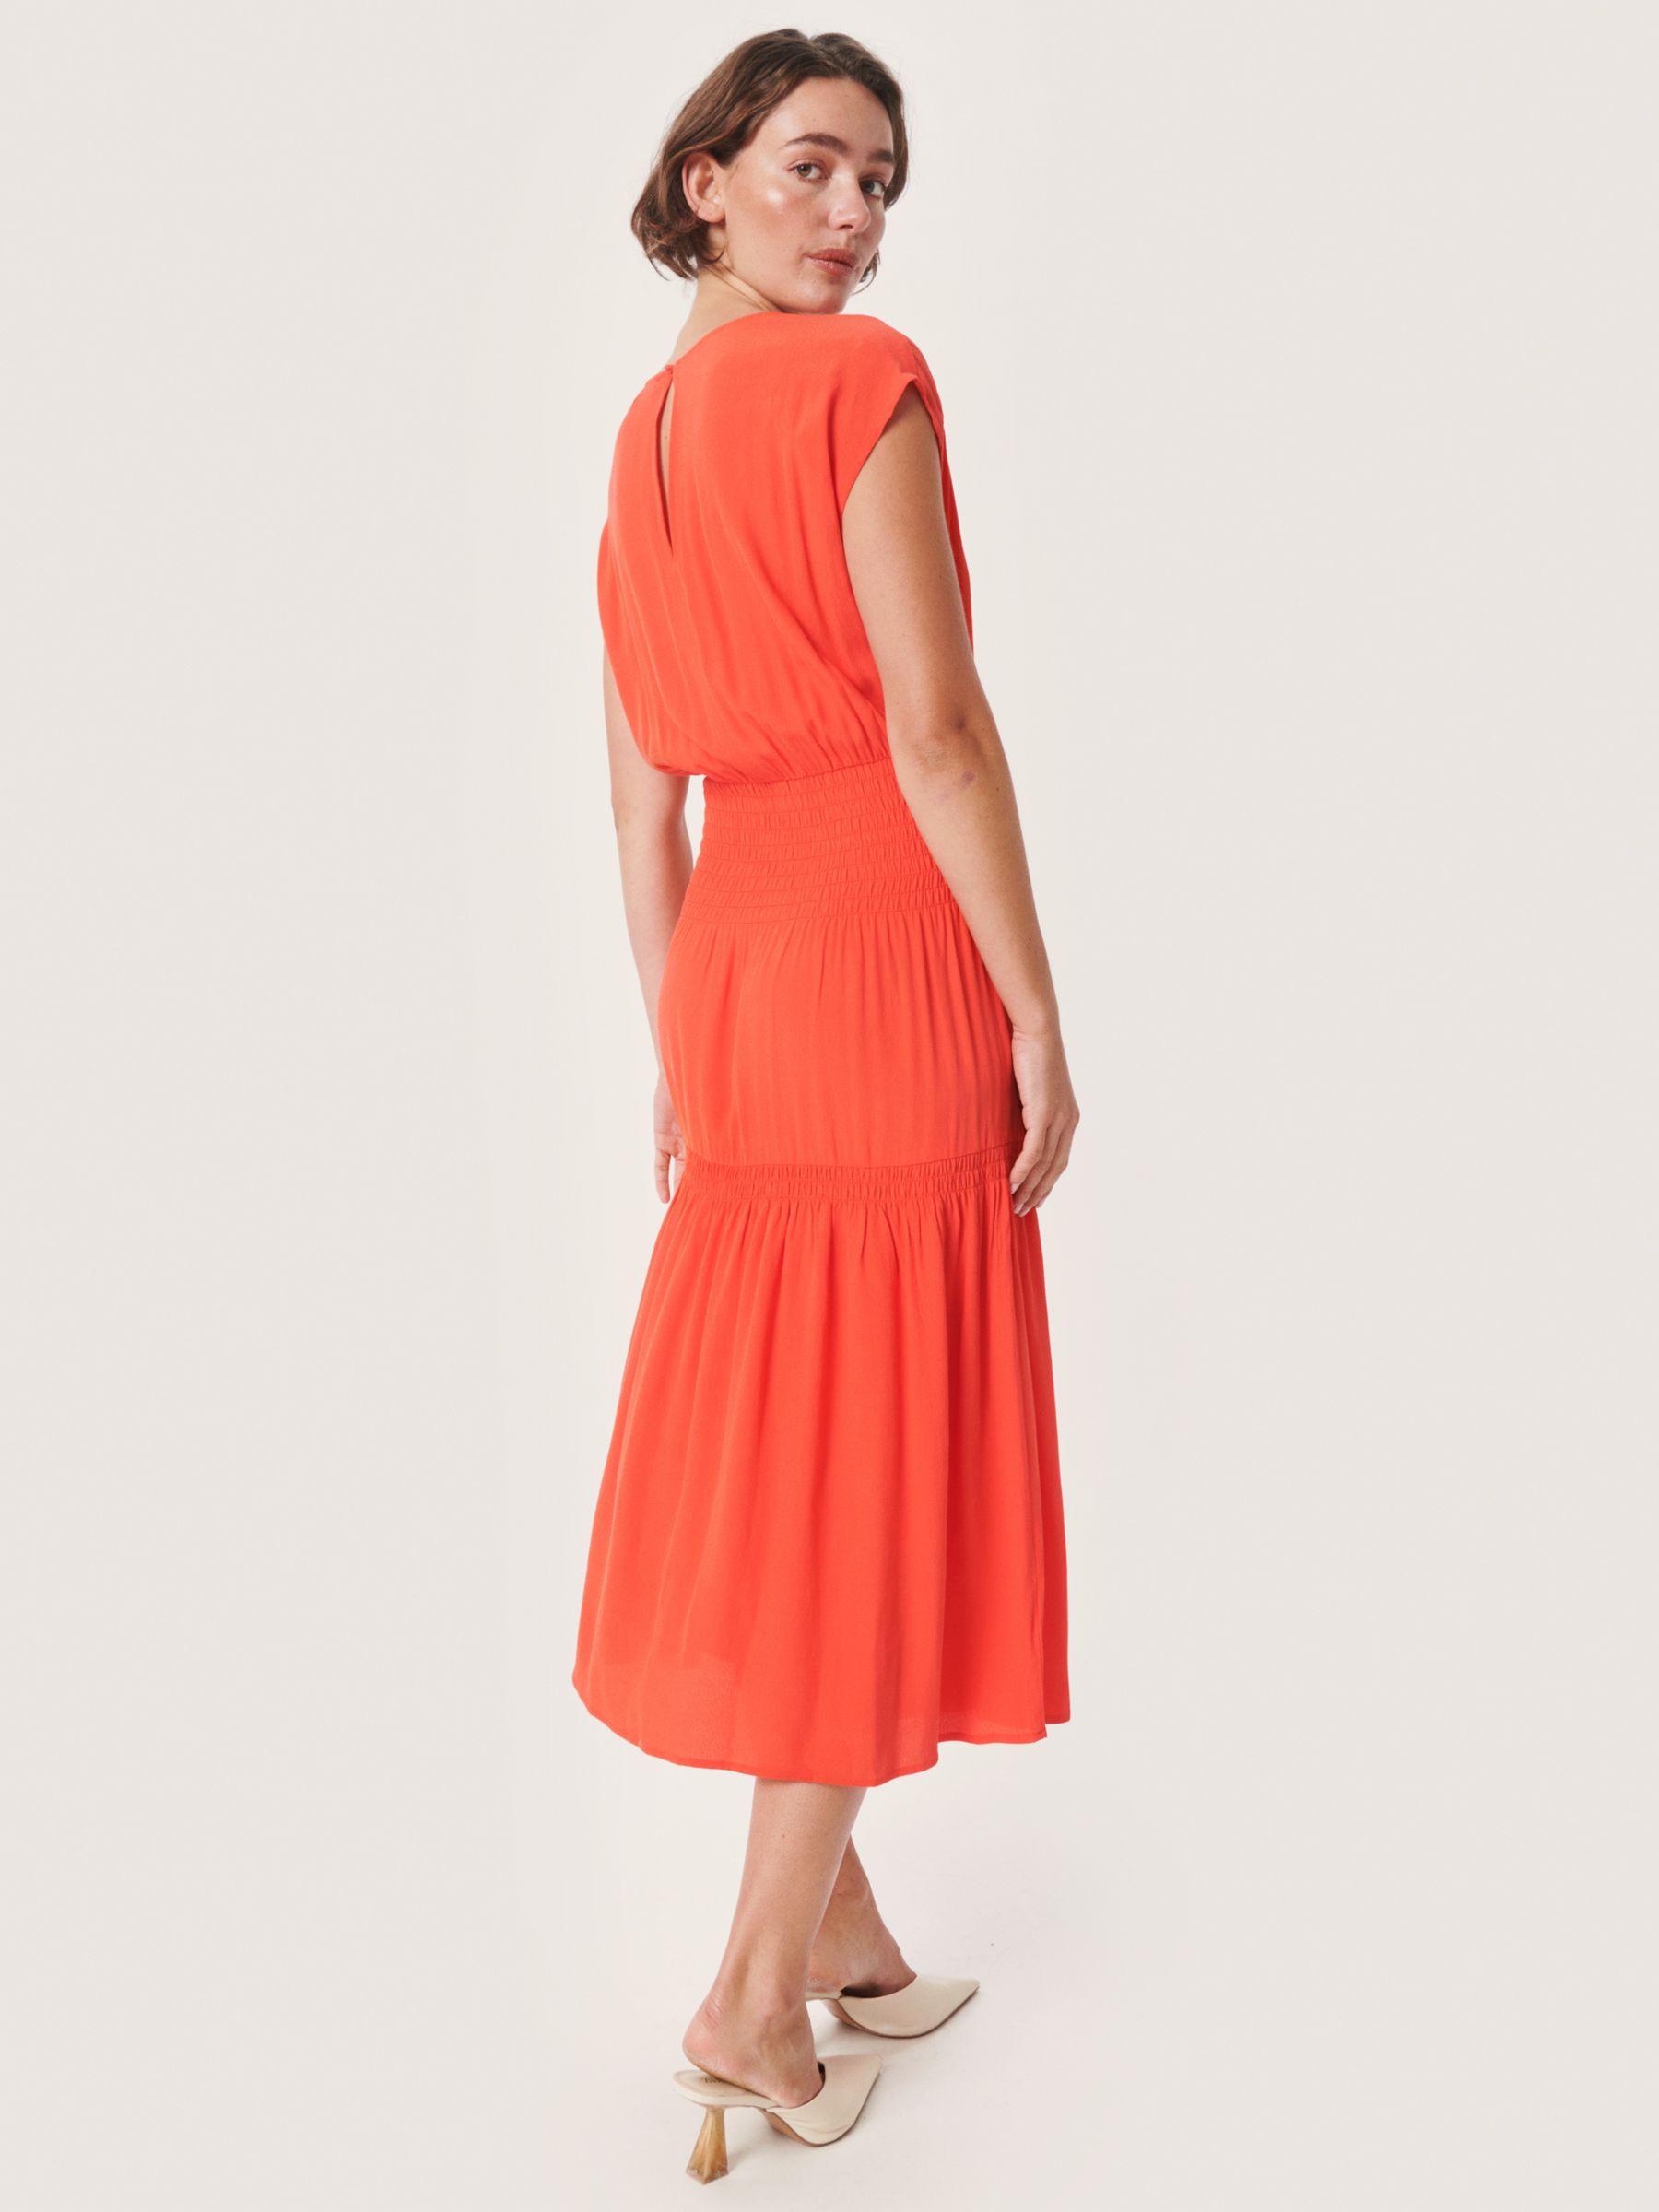 Buy Soaked In Luxury Layna Dress Online at johnlewis.com